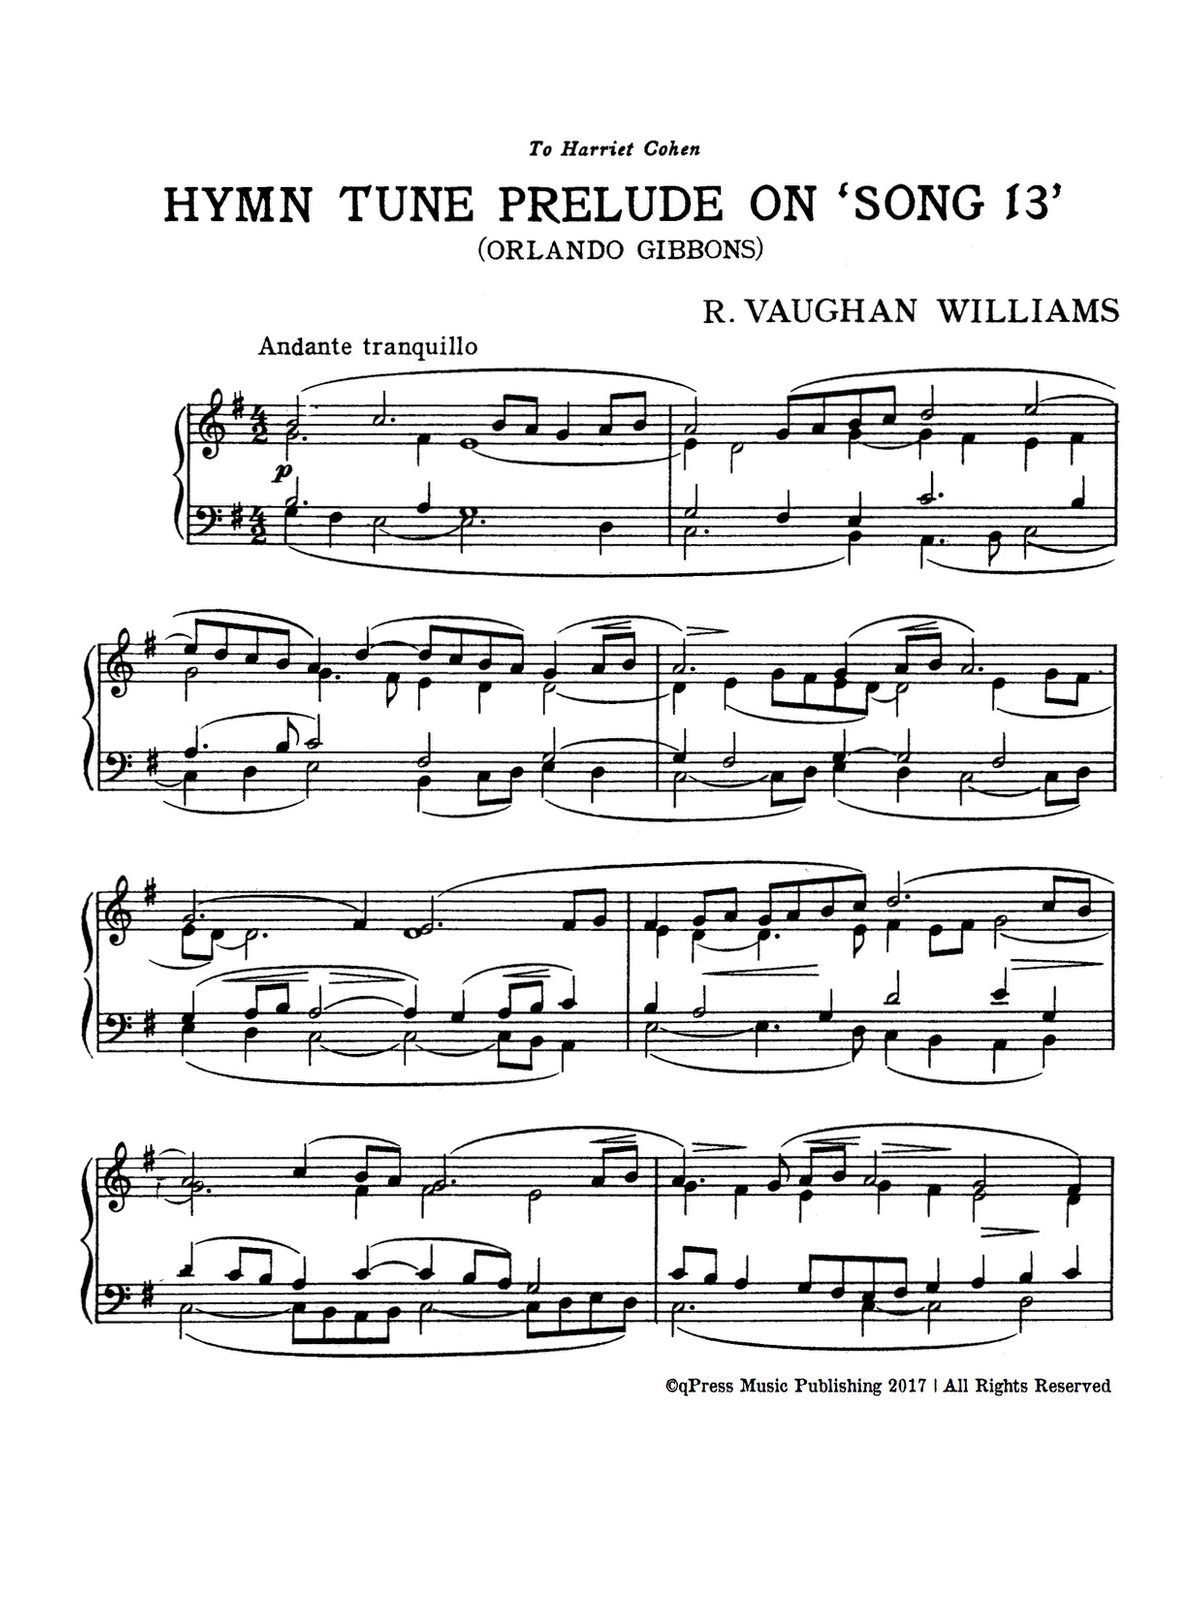 Vaughan Williams, Hymn Tune and Prelude on Song 13-p3